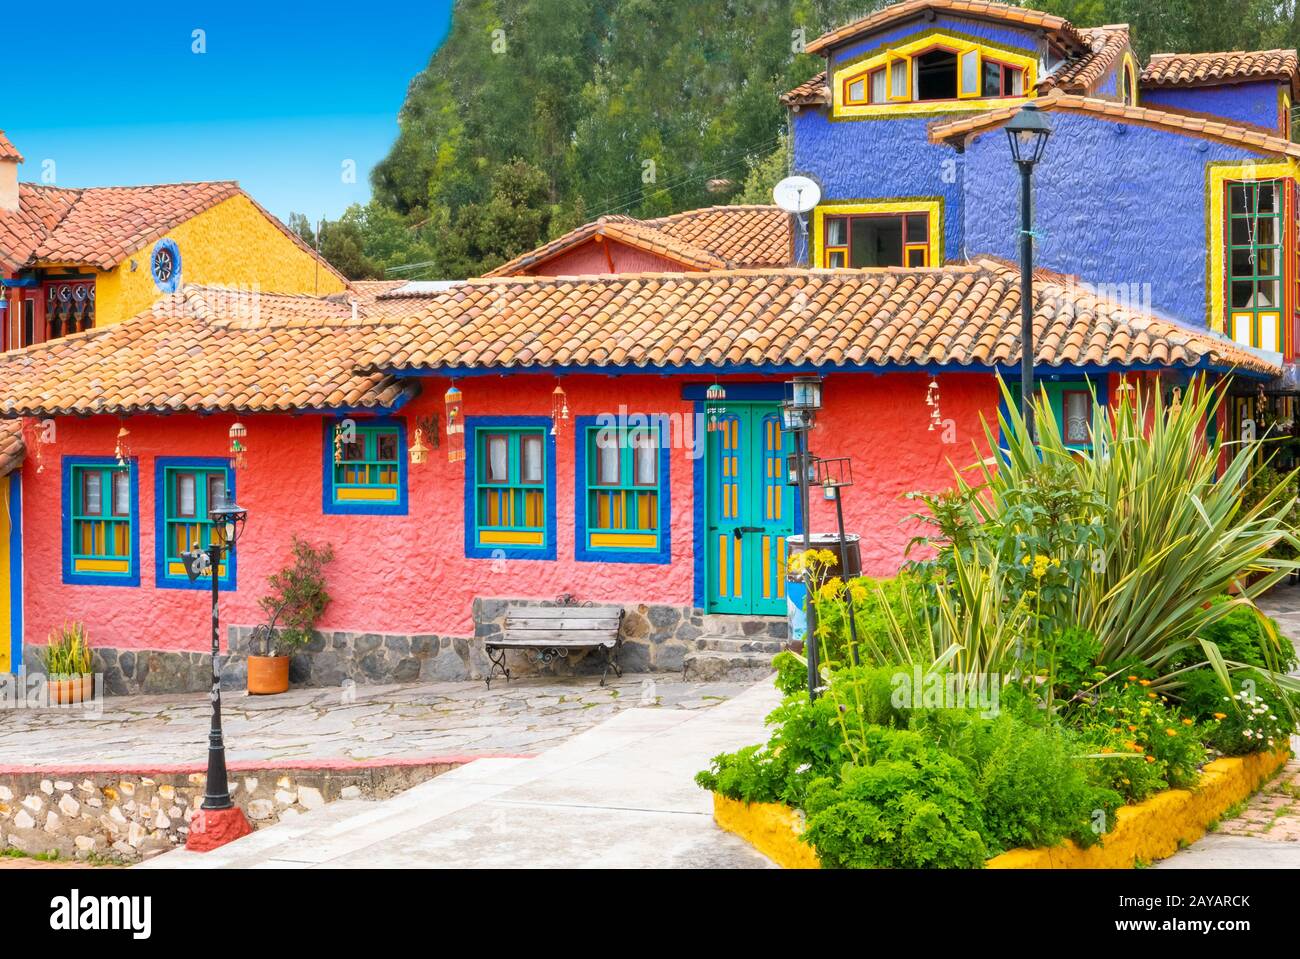 Raquira group of colorful colonial houses Stock Photo